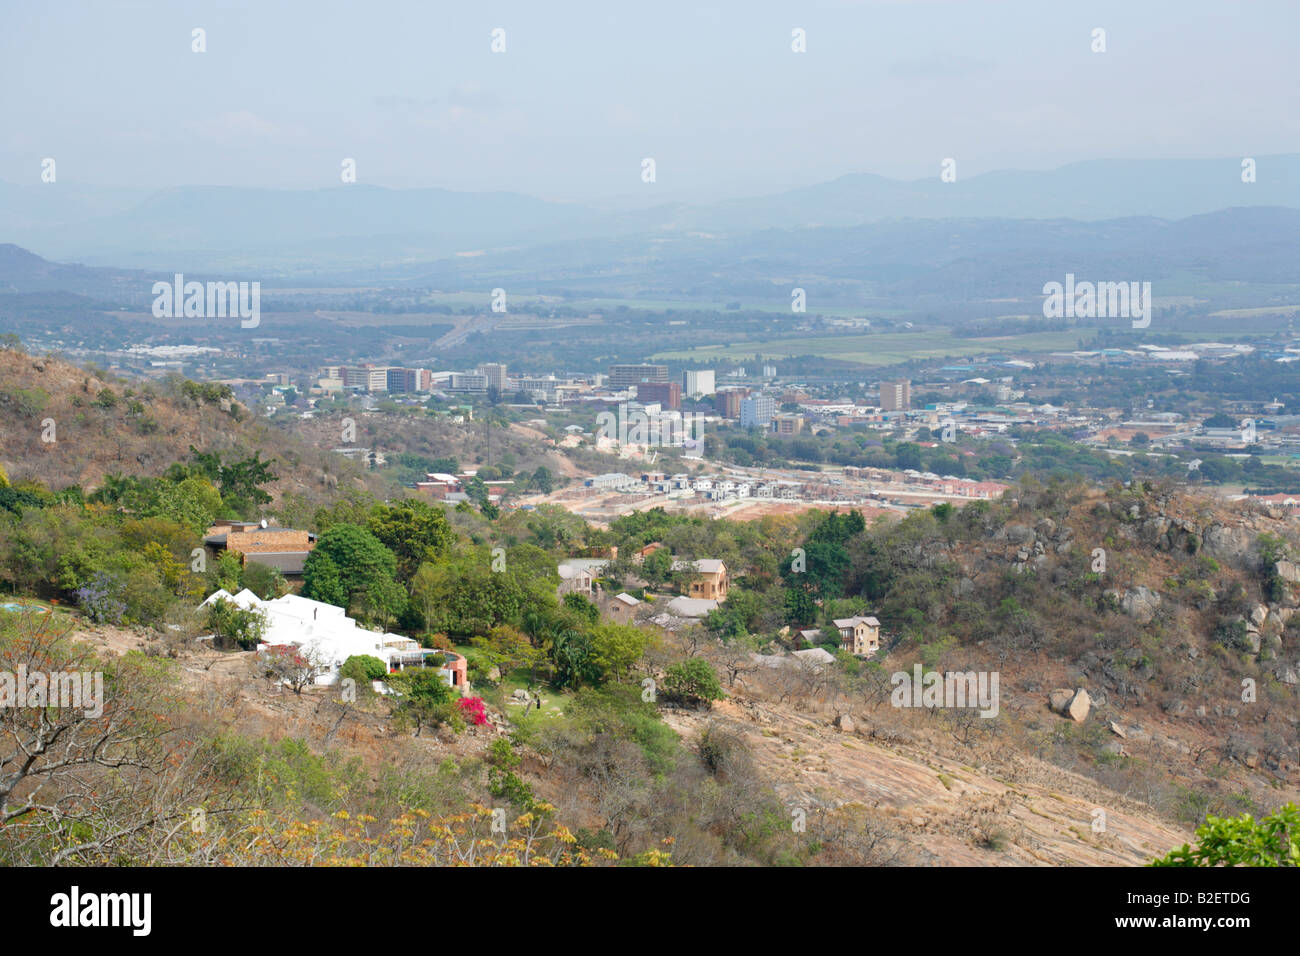 View over Nelspruit from one of the surrounding koppies Stock Photo